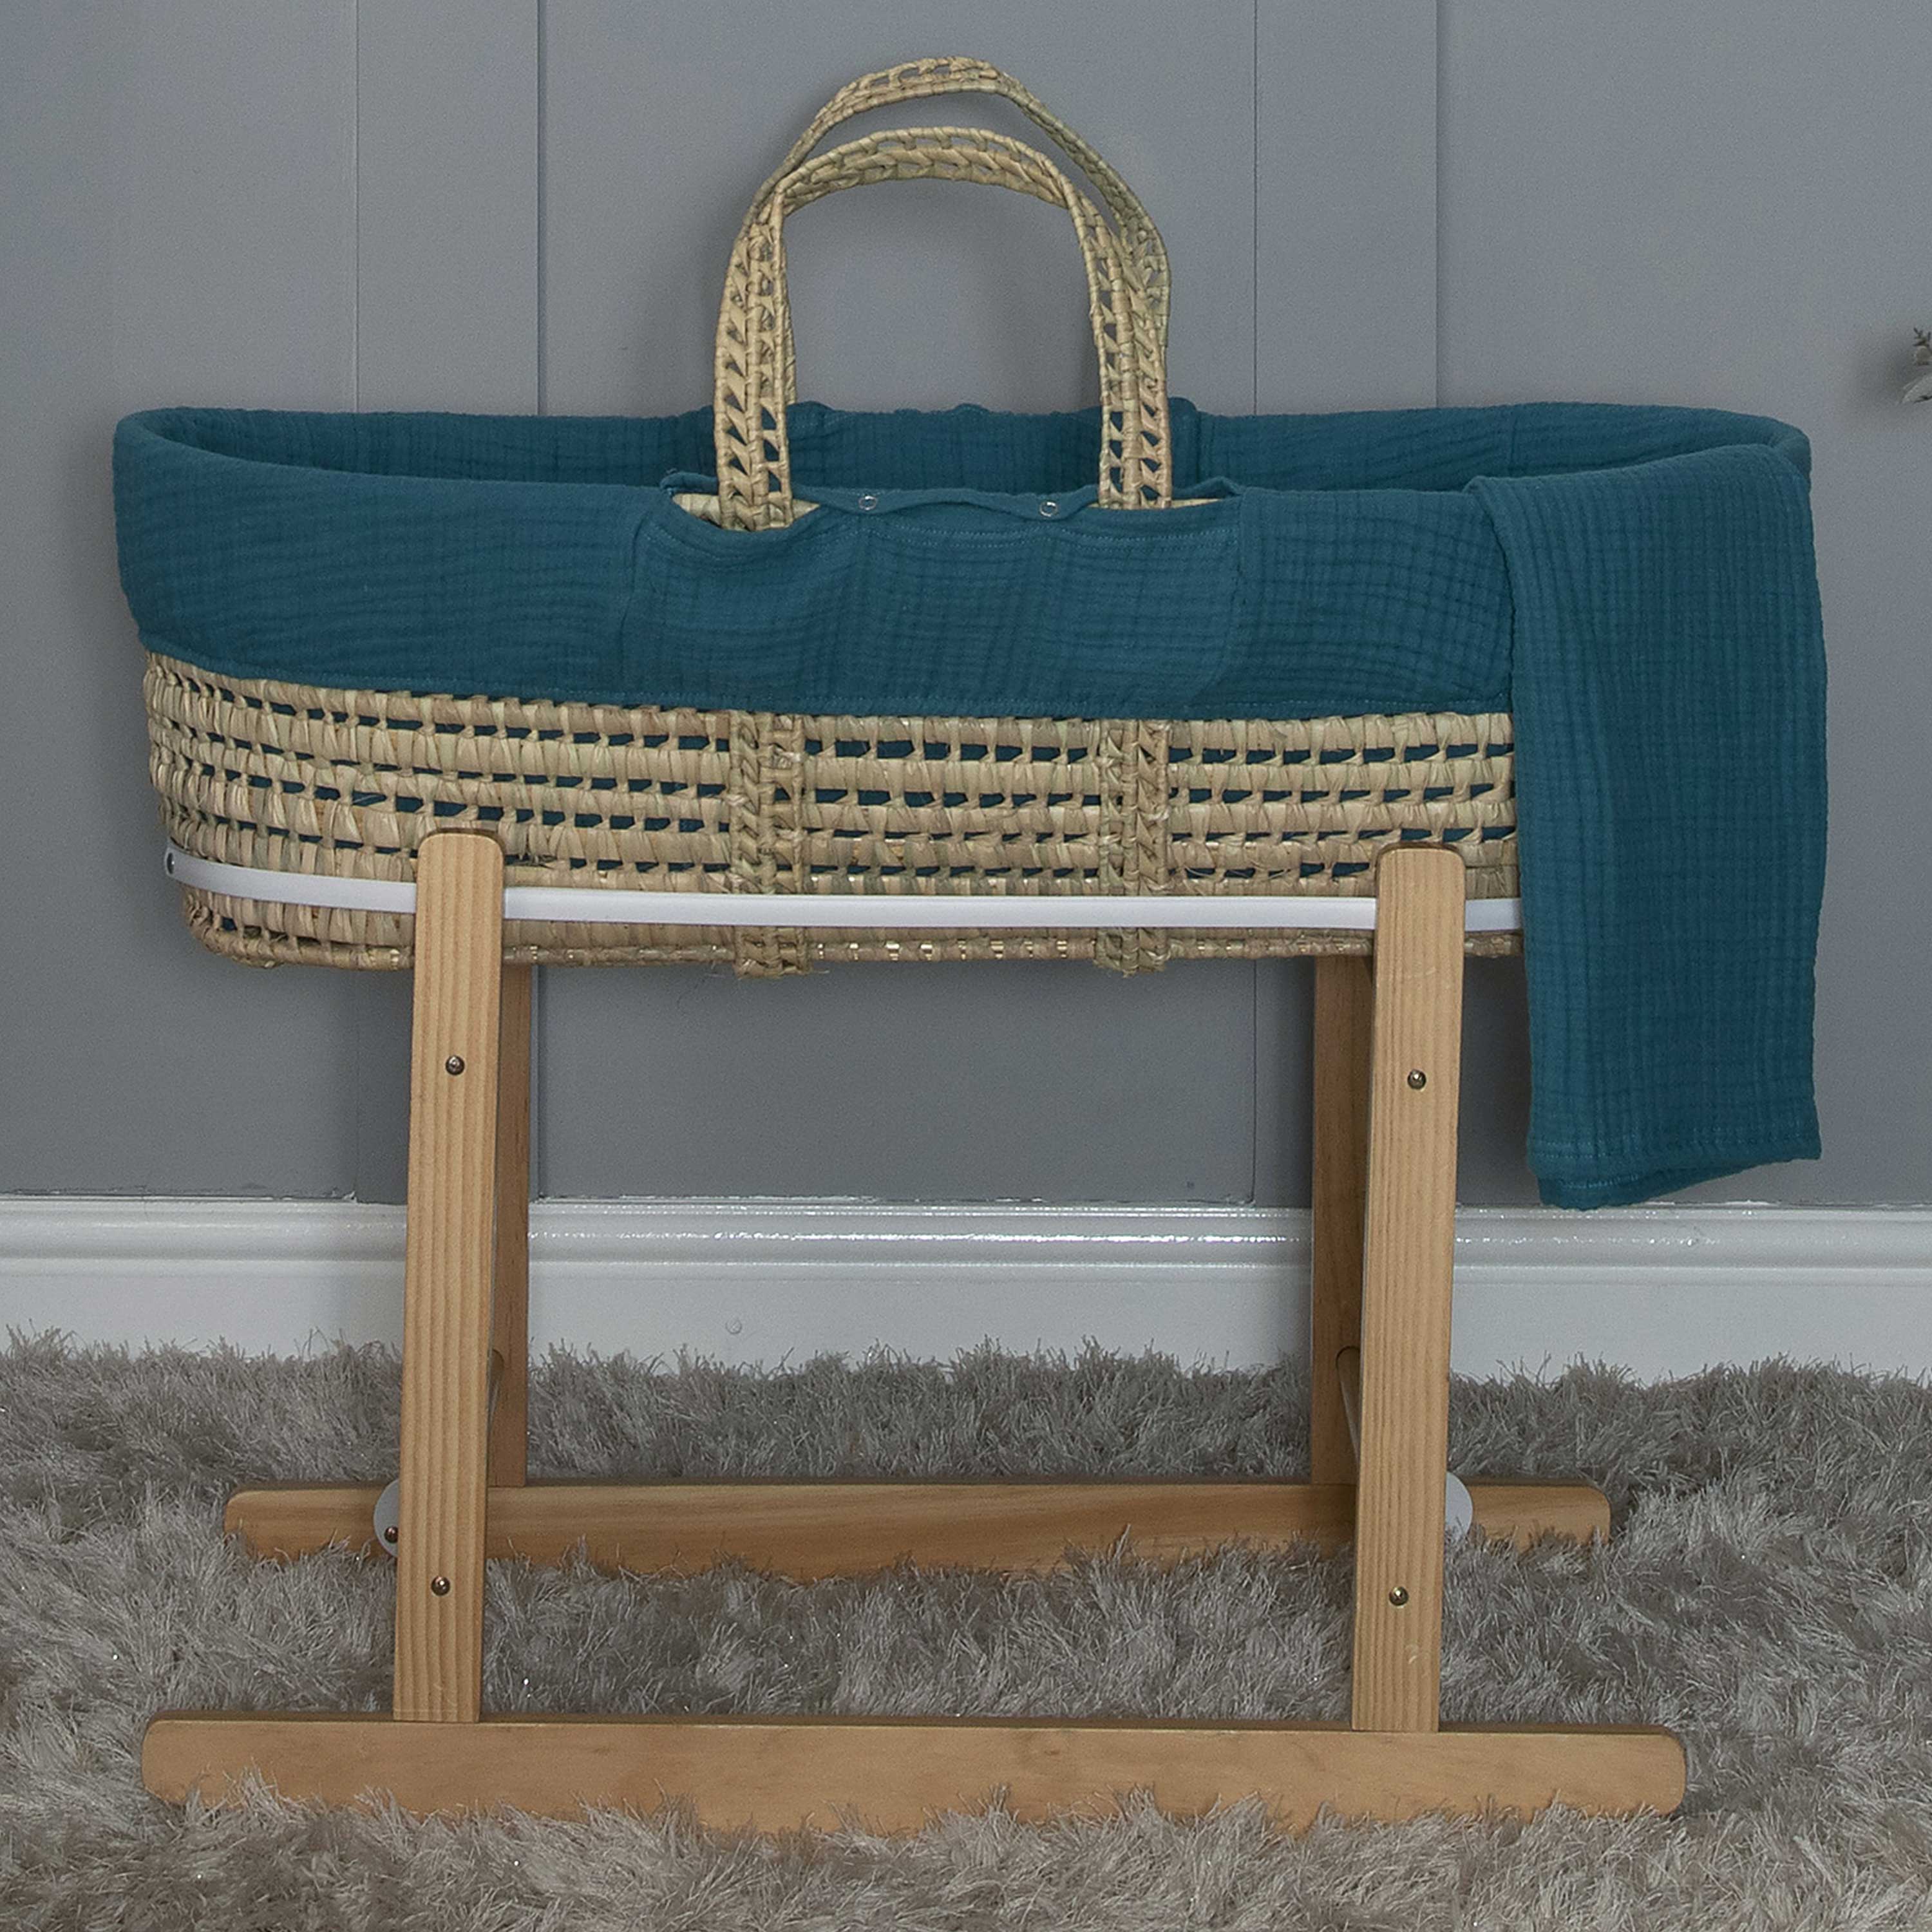 Amelia Jean Designs Palm Moses Basket With Folding Stand- Teal - For Your Little One